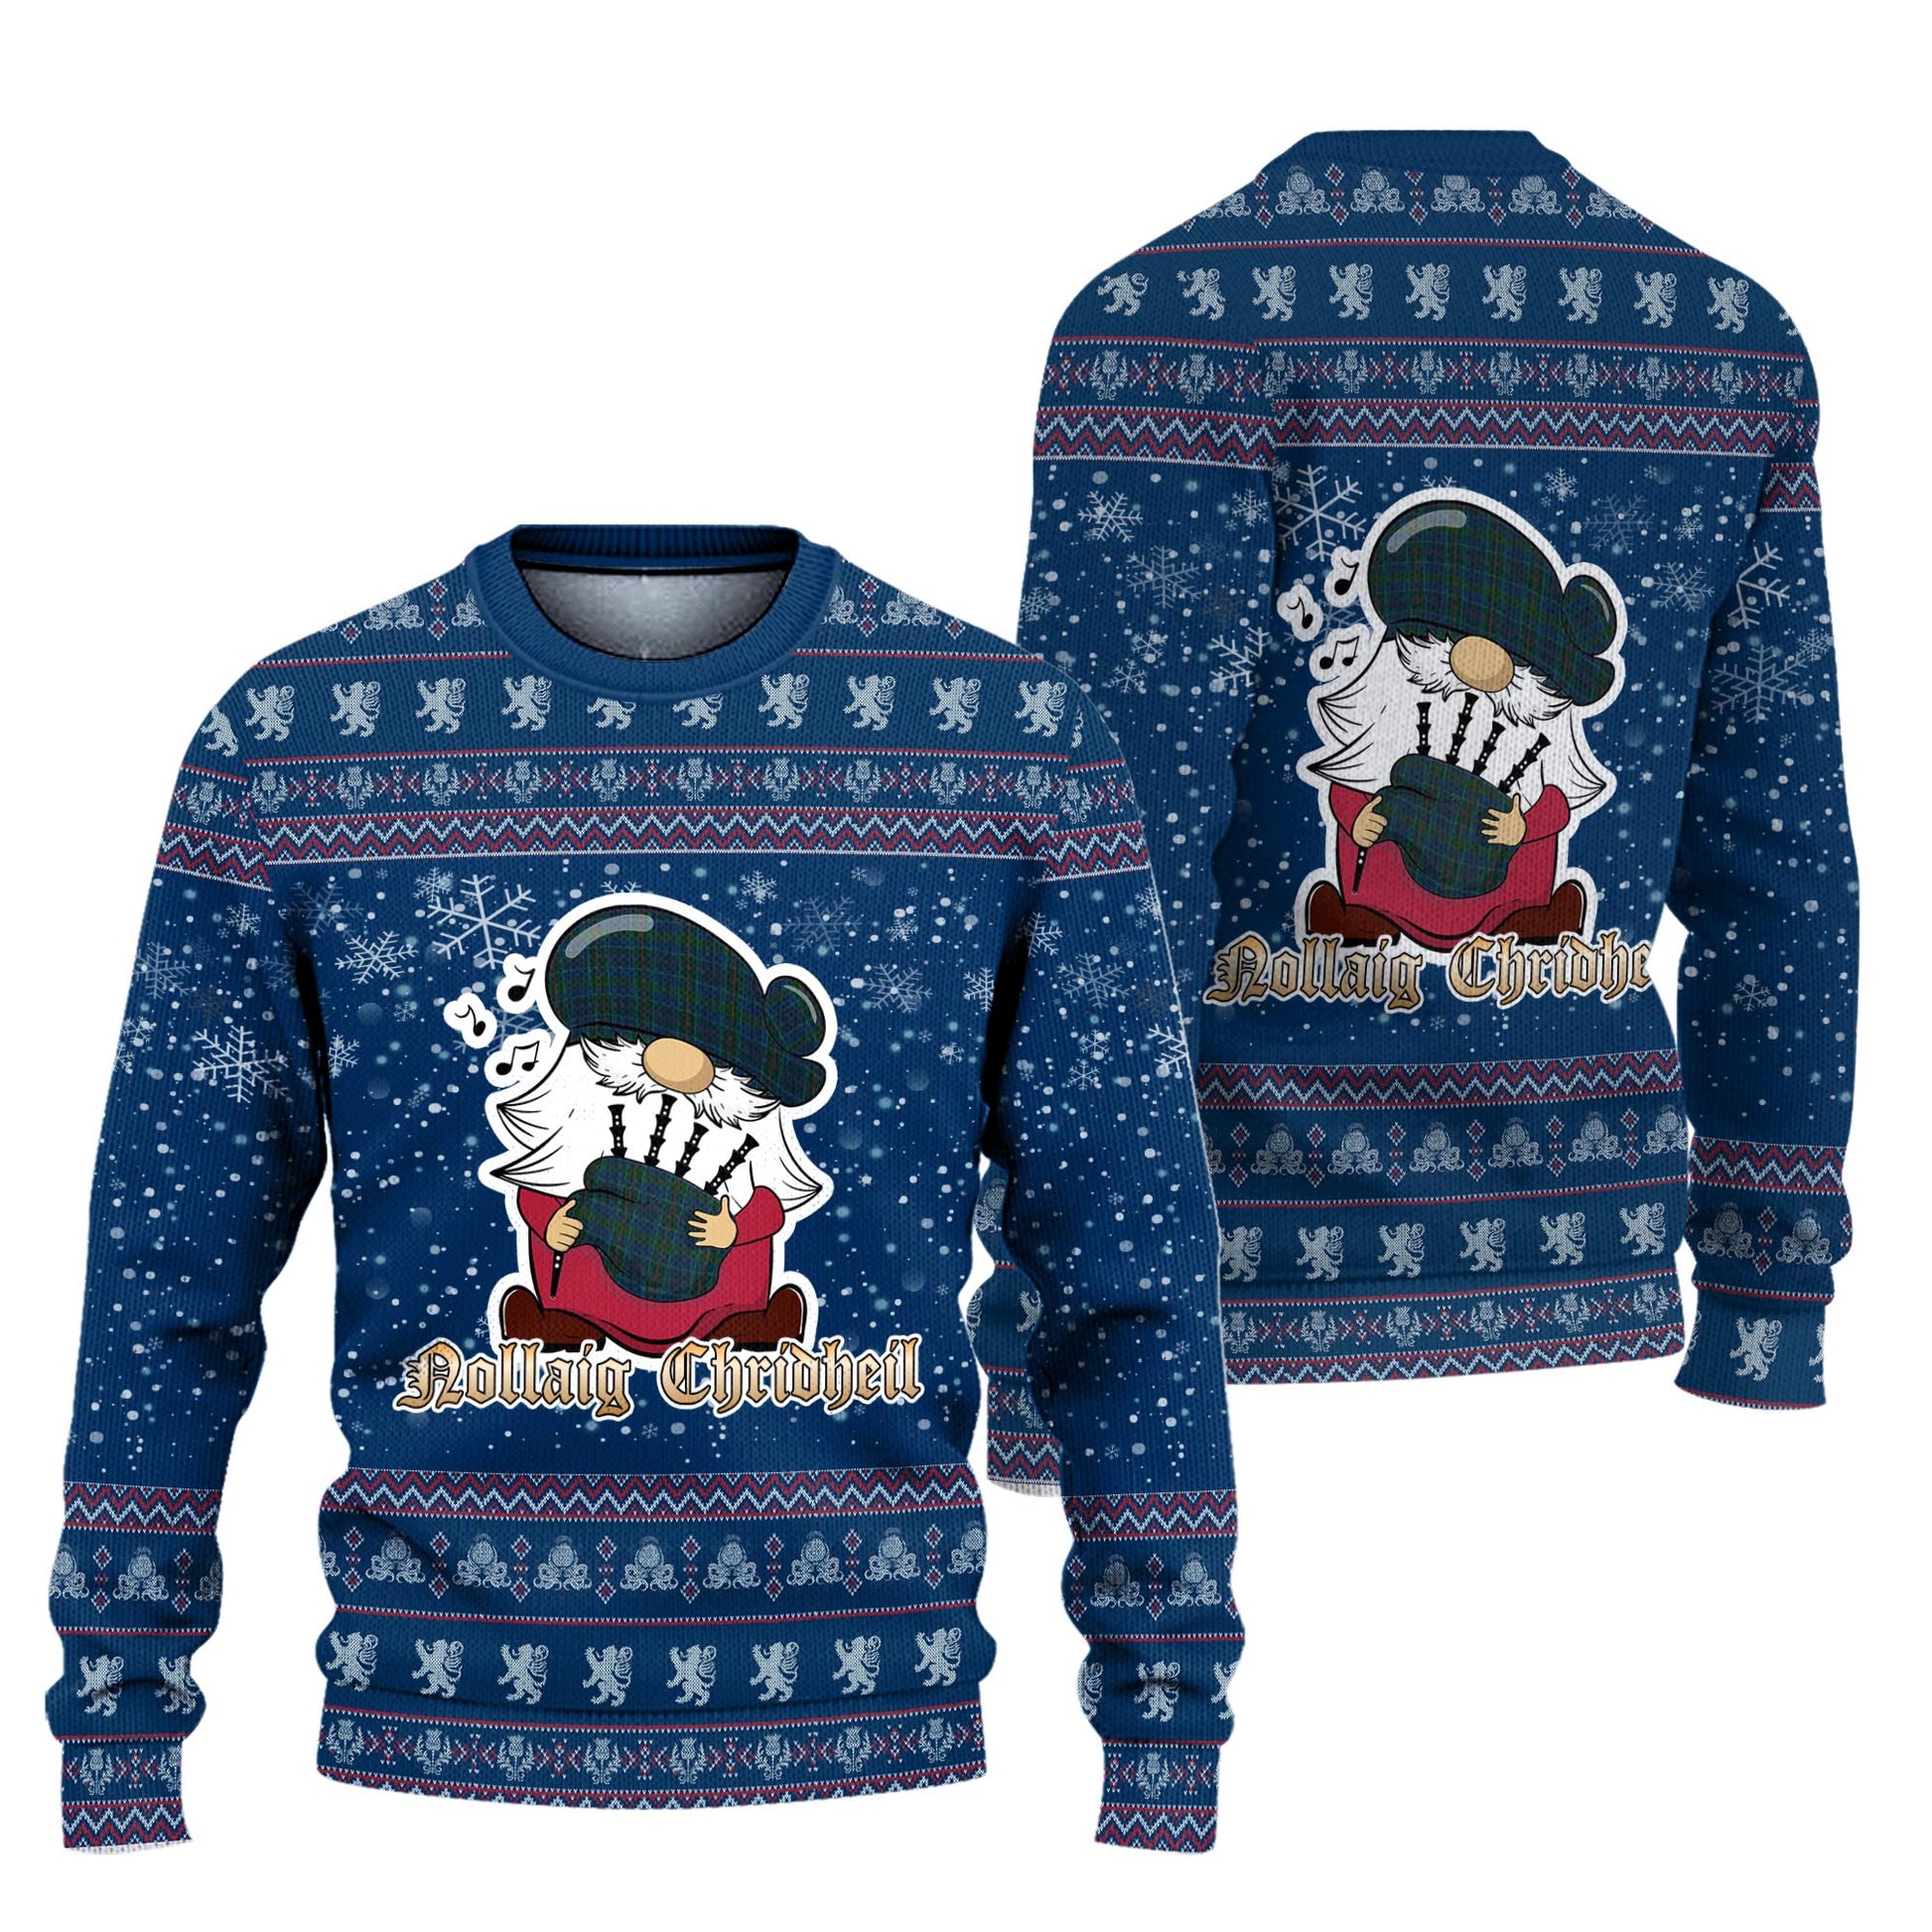 Richard of Wales Clan Christmas Family Knitted Sweater with Funny Gnome Playing Bagpipes Unisex Blue - Tartanvibesclothing